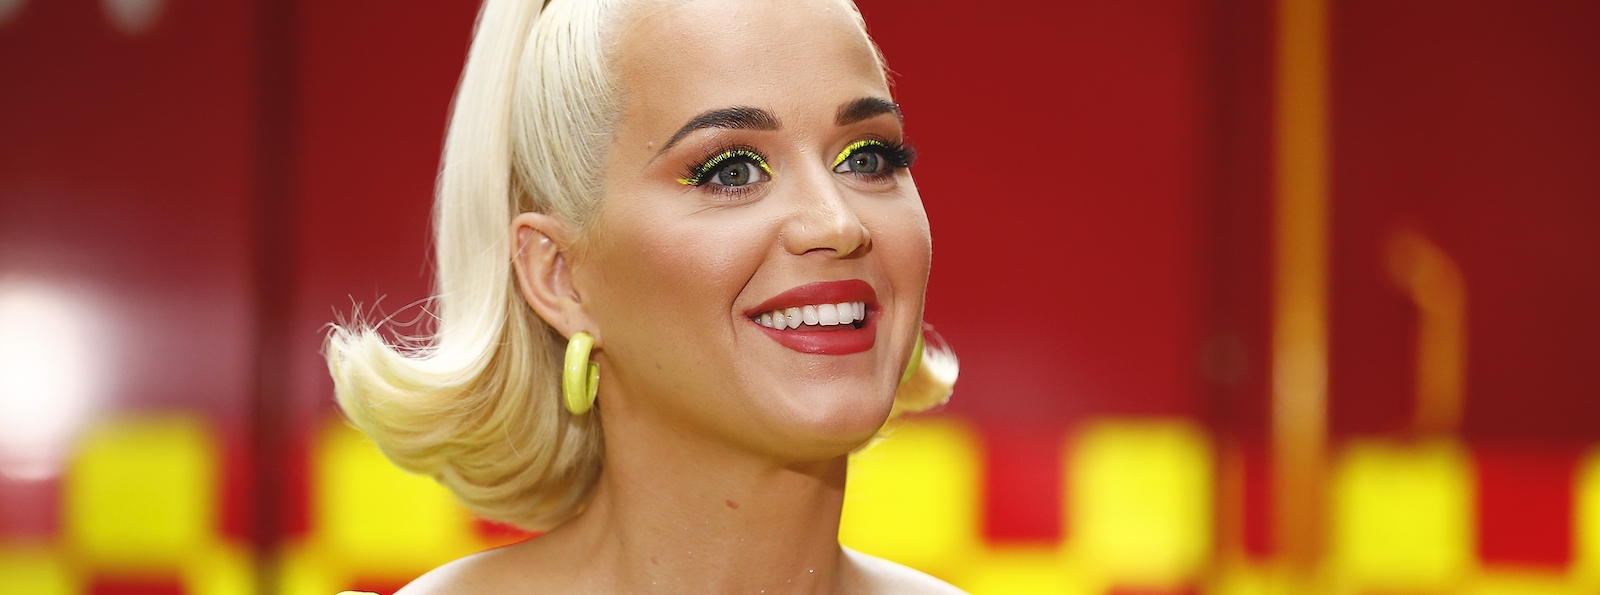 Katy Perry, J. Balvin And Post Malone All Contributed Songs To ‘Pokemon 25: The Album’